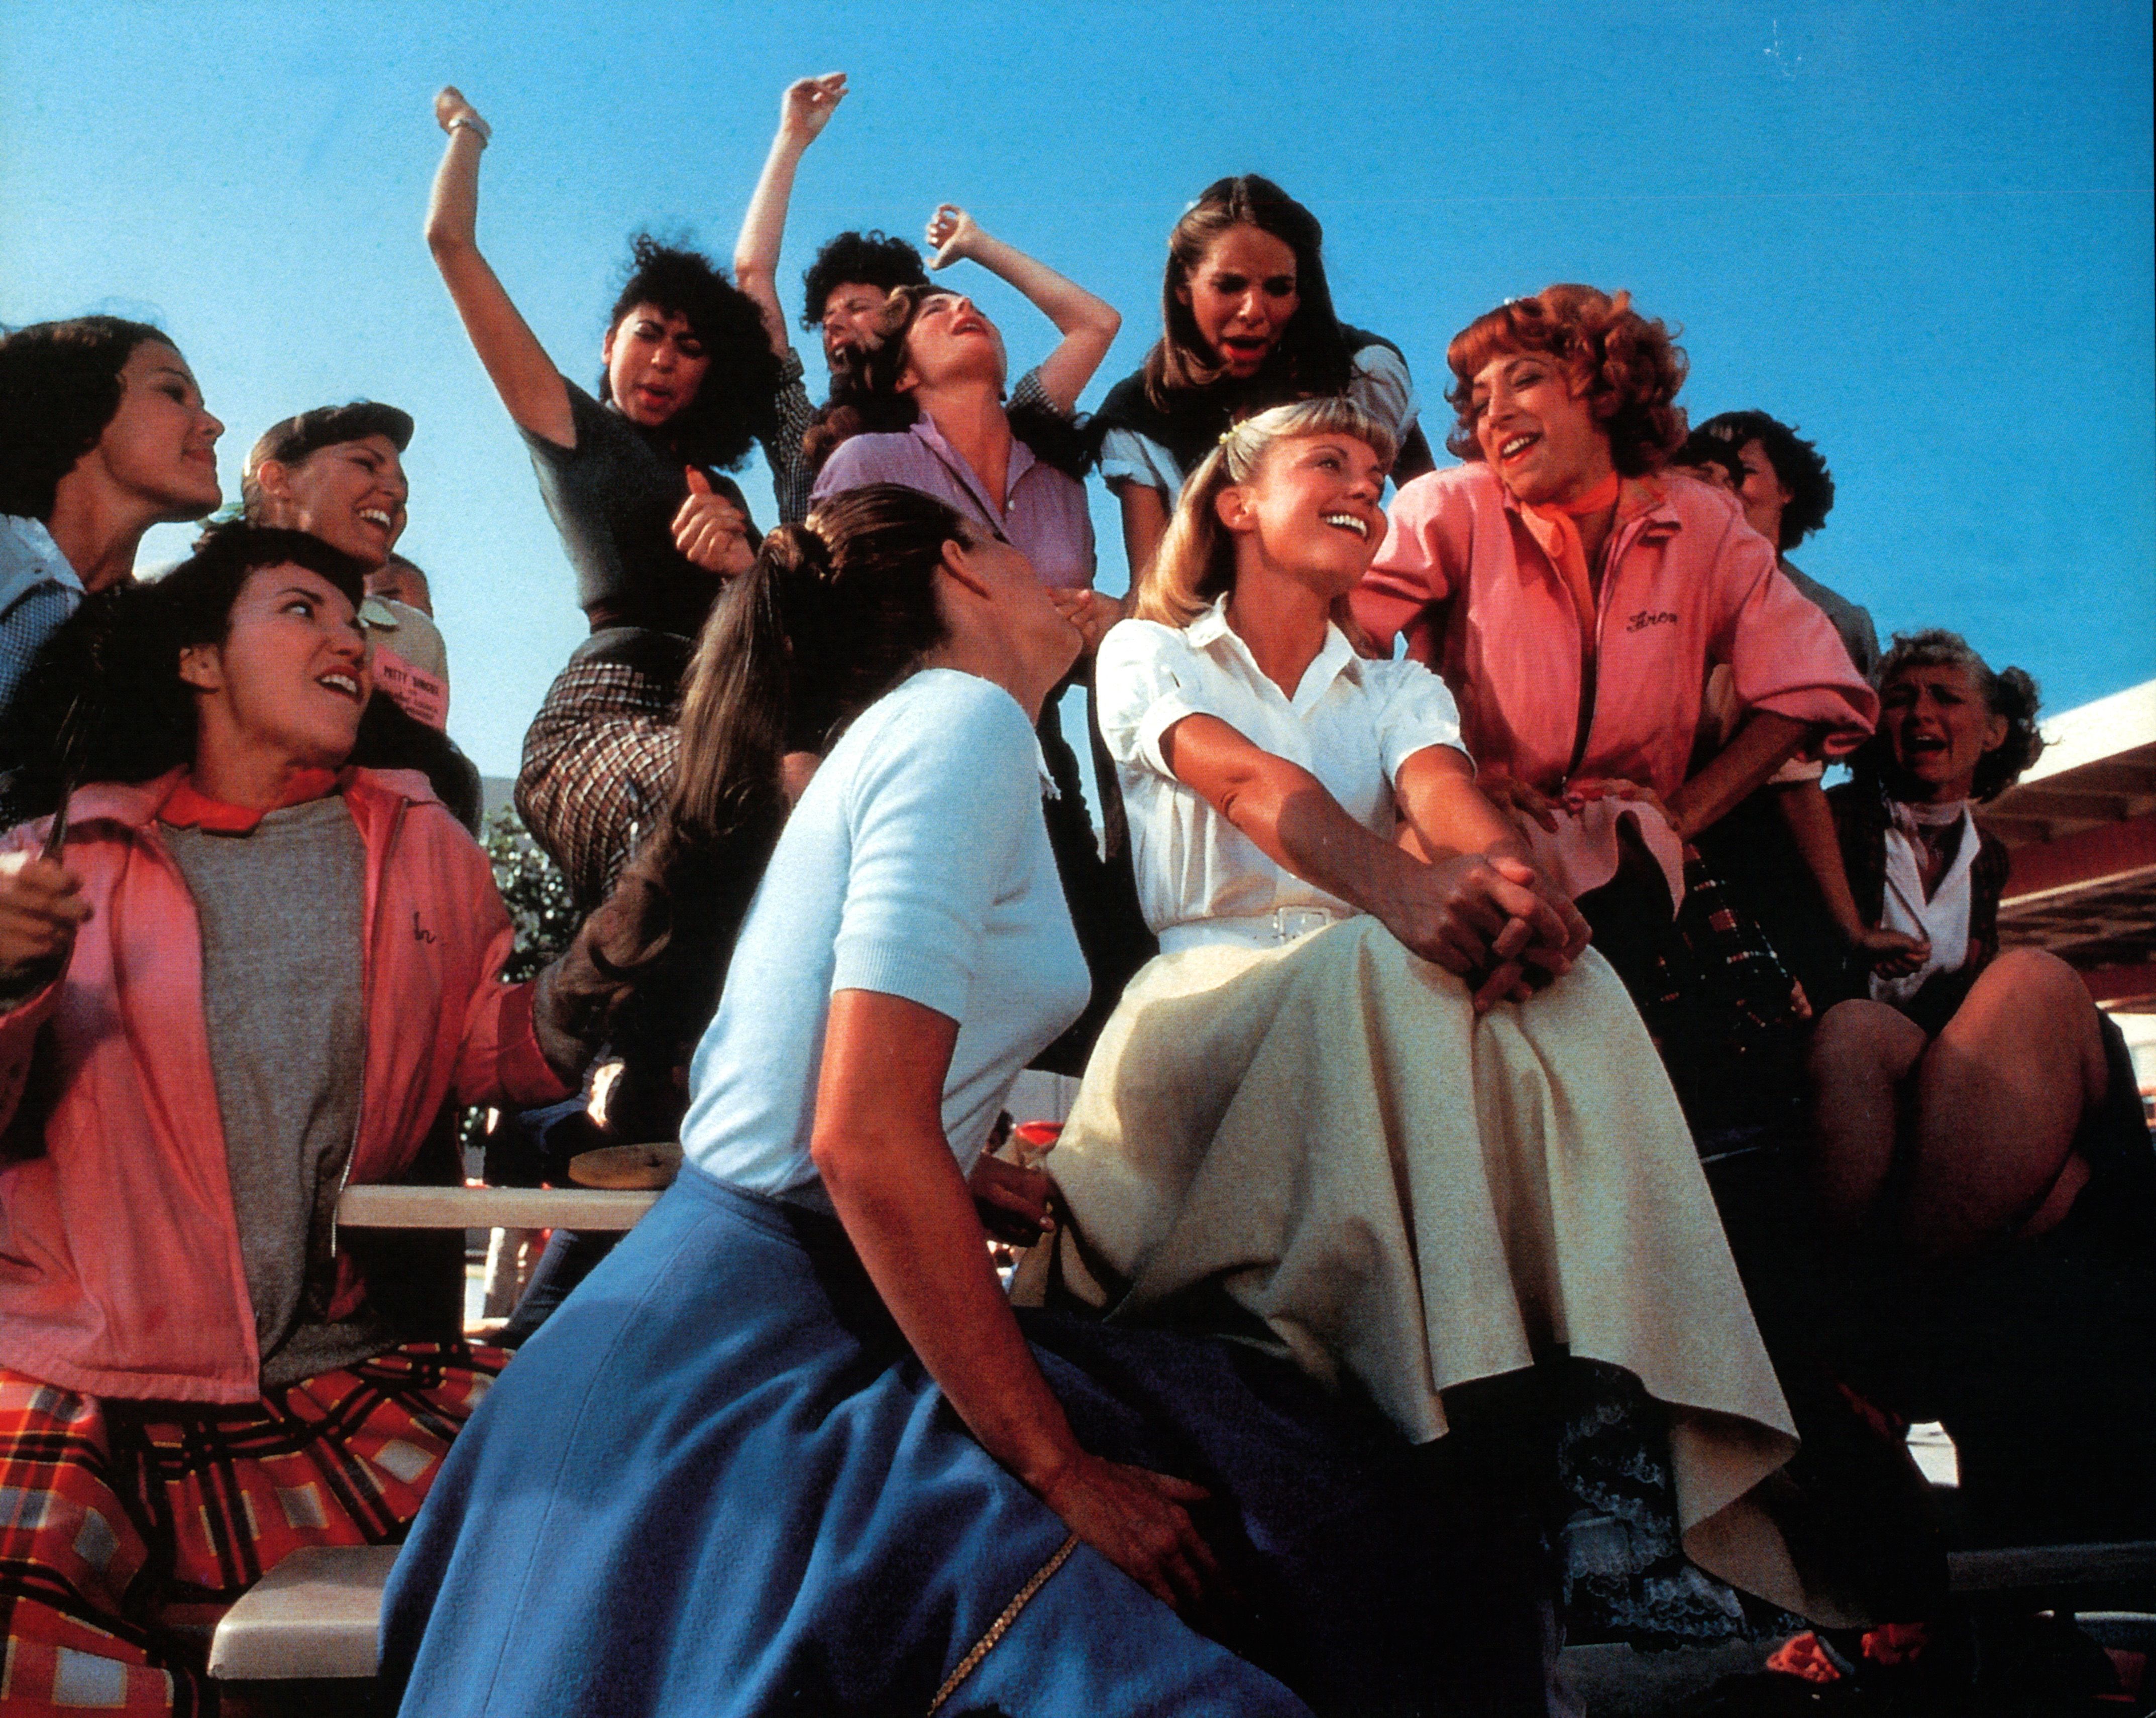 Grease is getting a prequel TV series all about the Pink Ladies